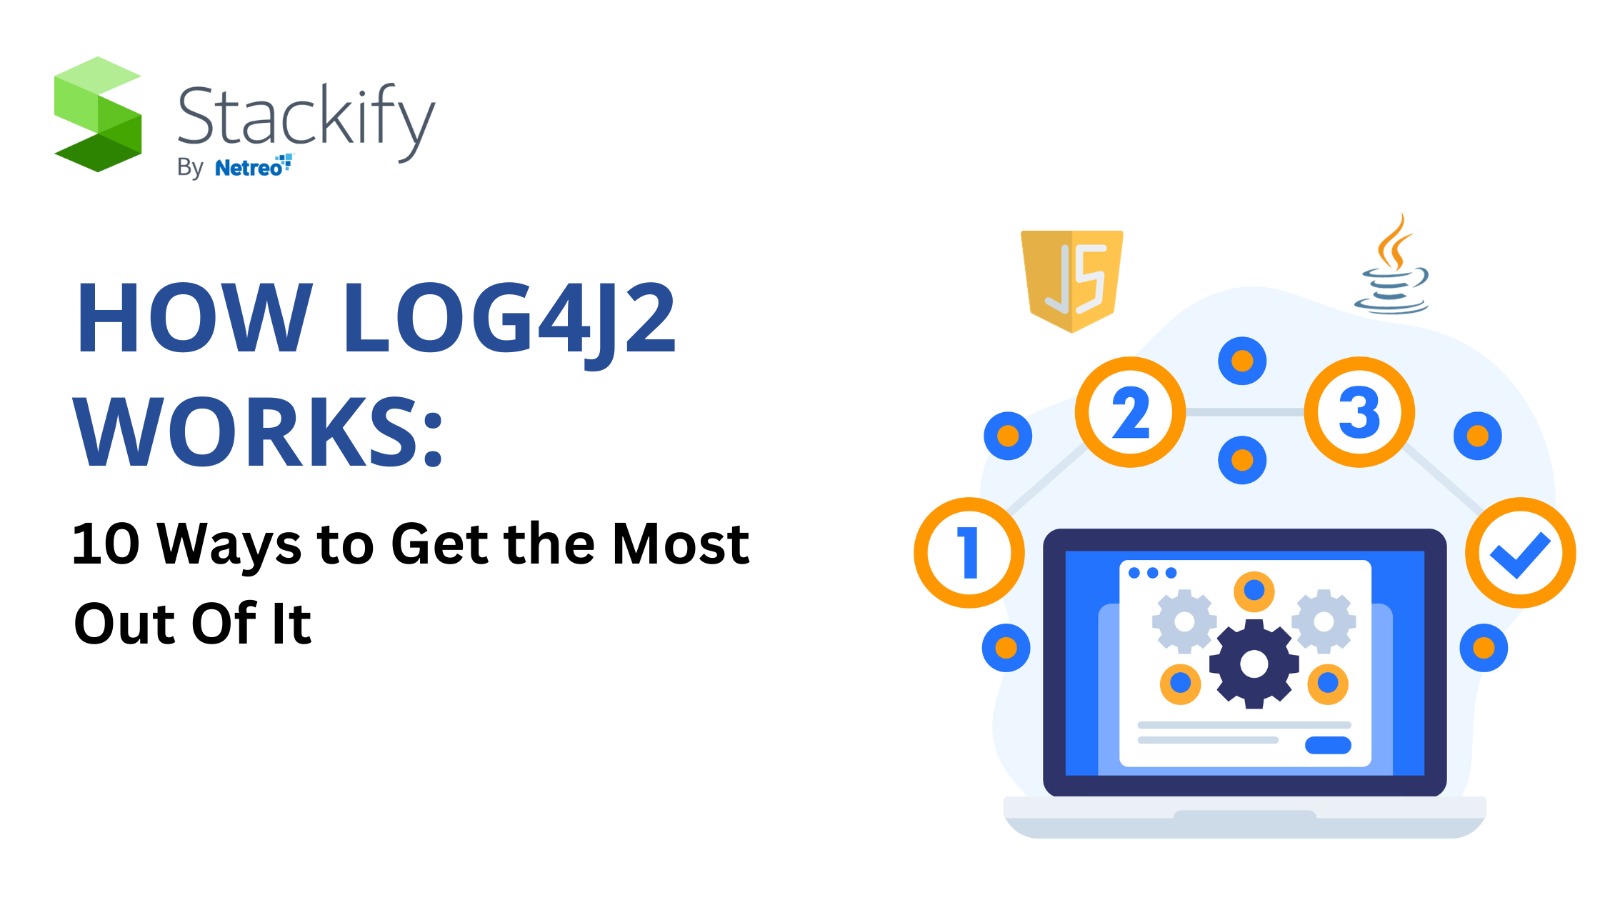 How Log4J2 Works: 10 Ways to Get the Most Out Of It